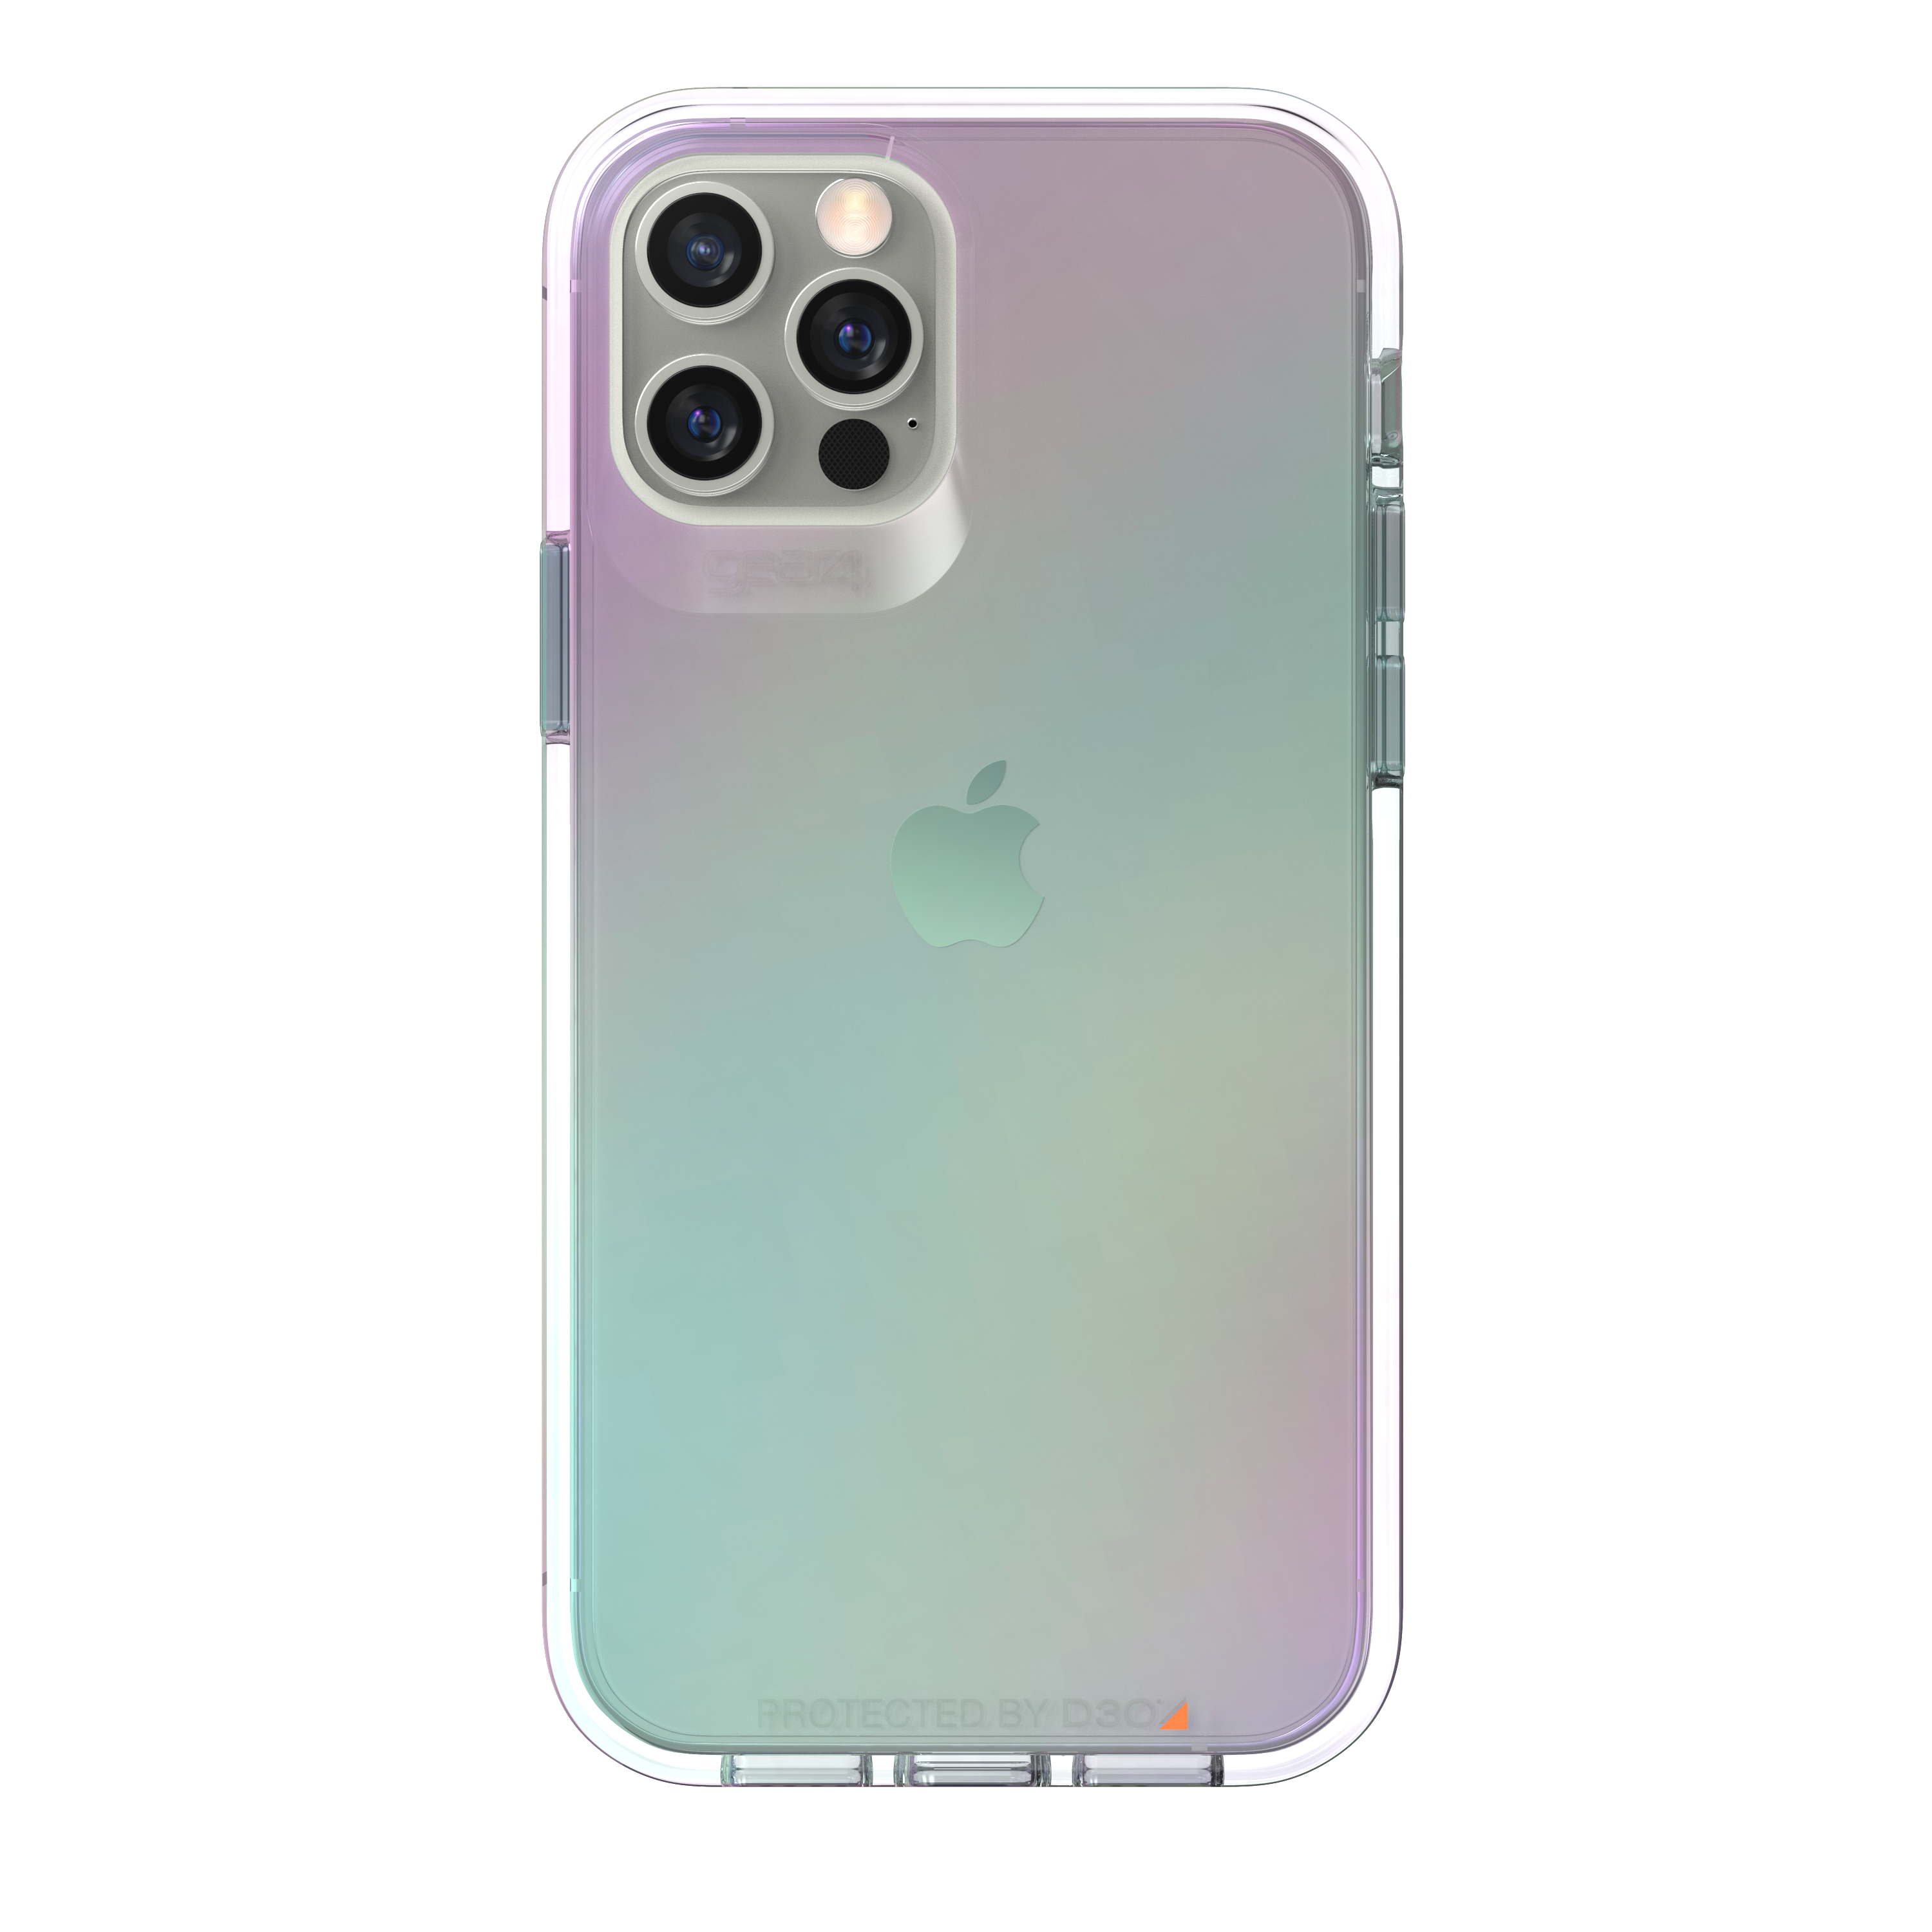 iPhone Pro, Iridescent Apple, GEAR4 D3O Backcover, Crystal 12/12 Palace,